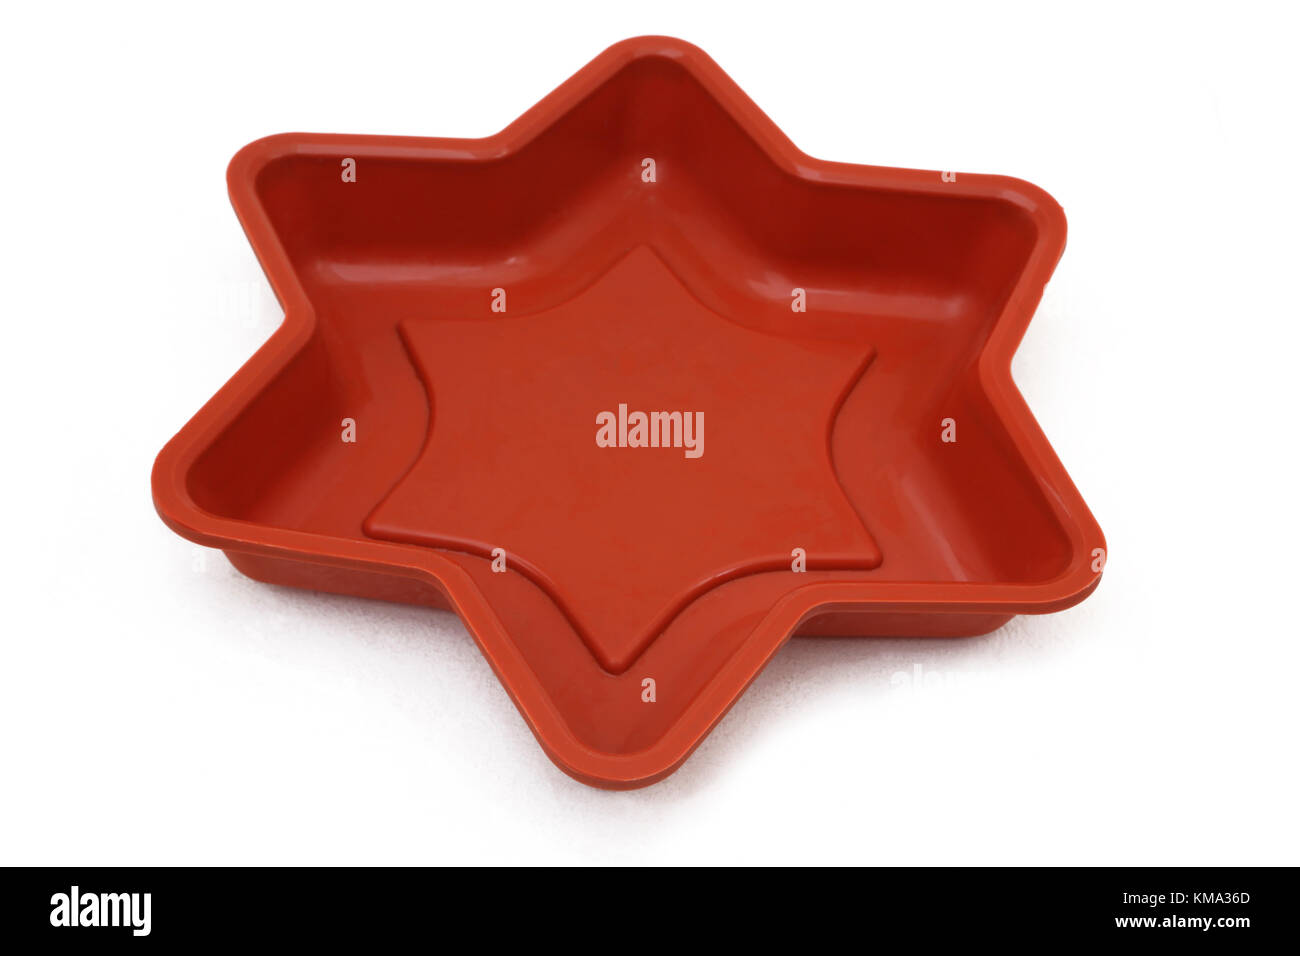 Silicone Star Shape Cake Mould Stock Photo